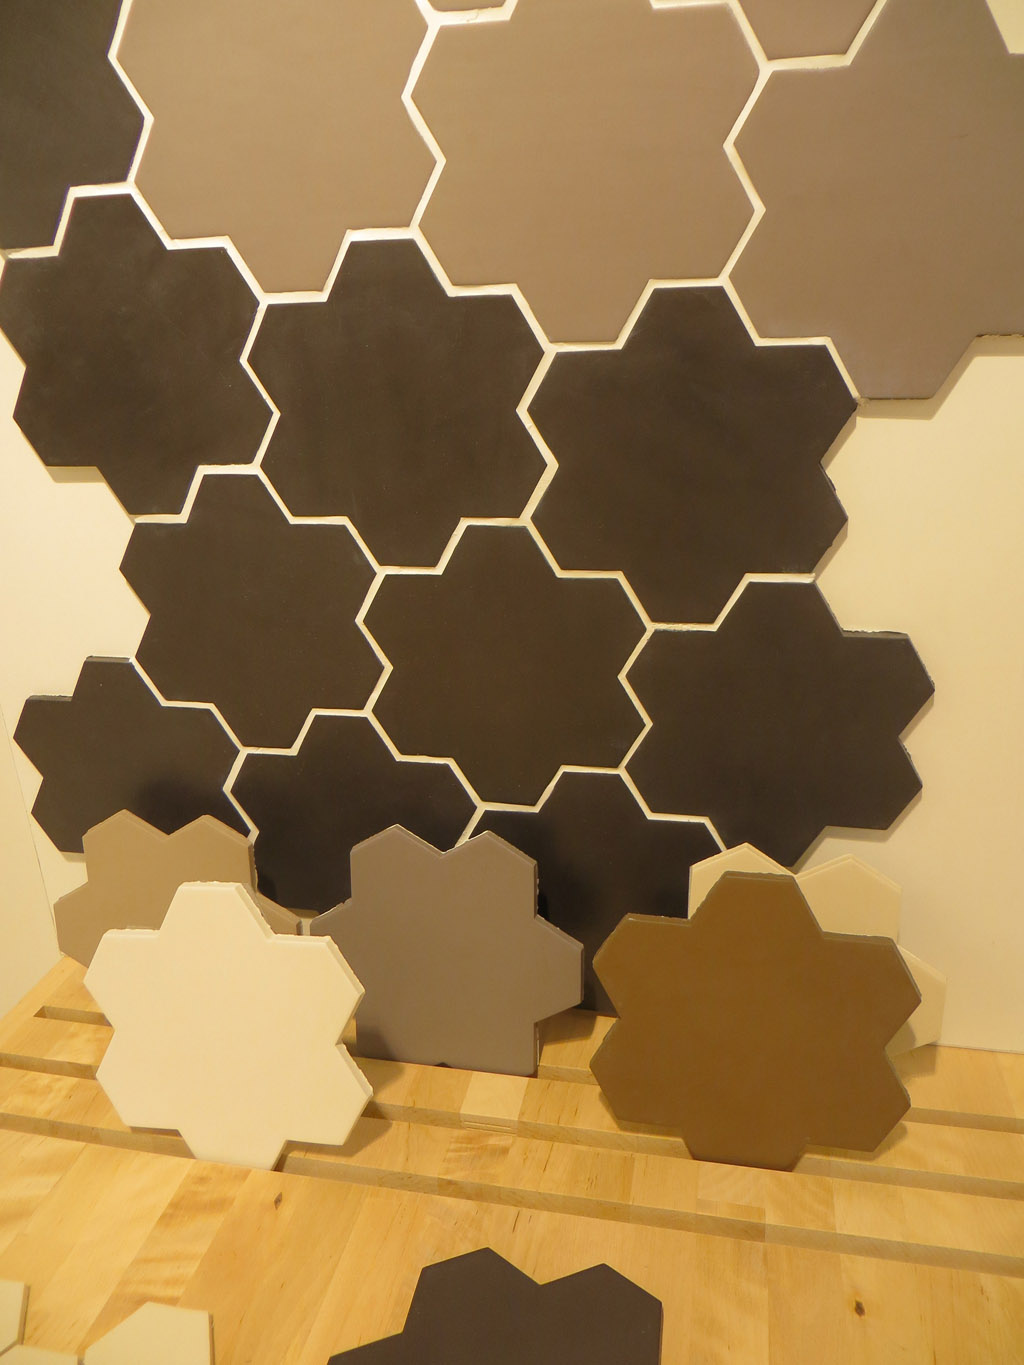 Ceramic and Porcelain Tiles by Tonalite